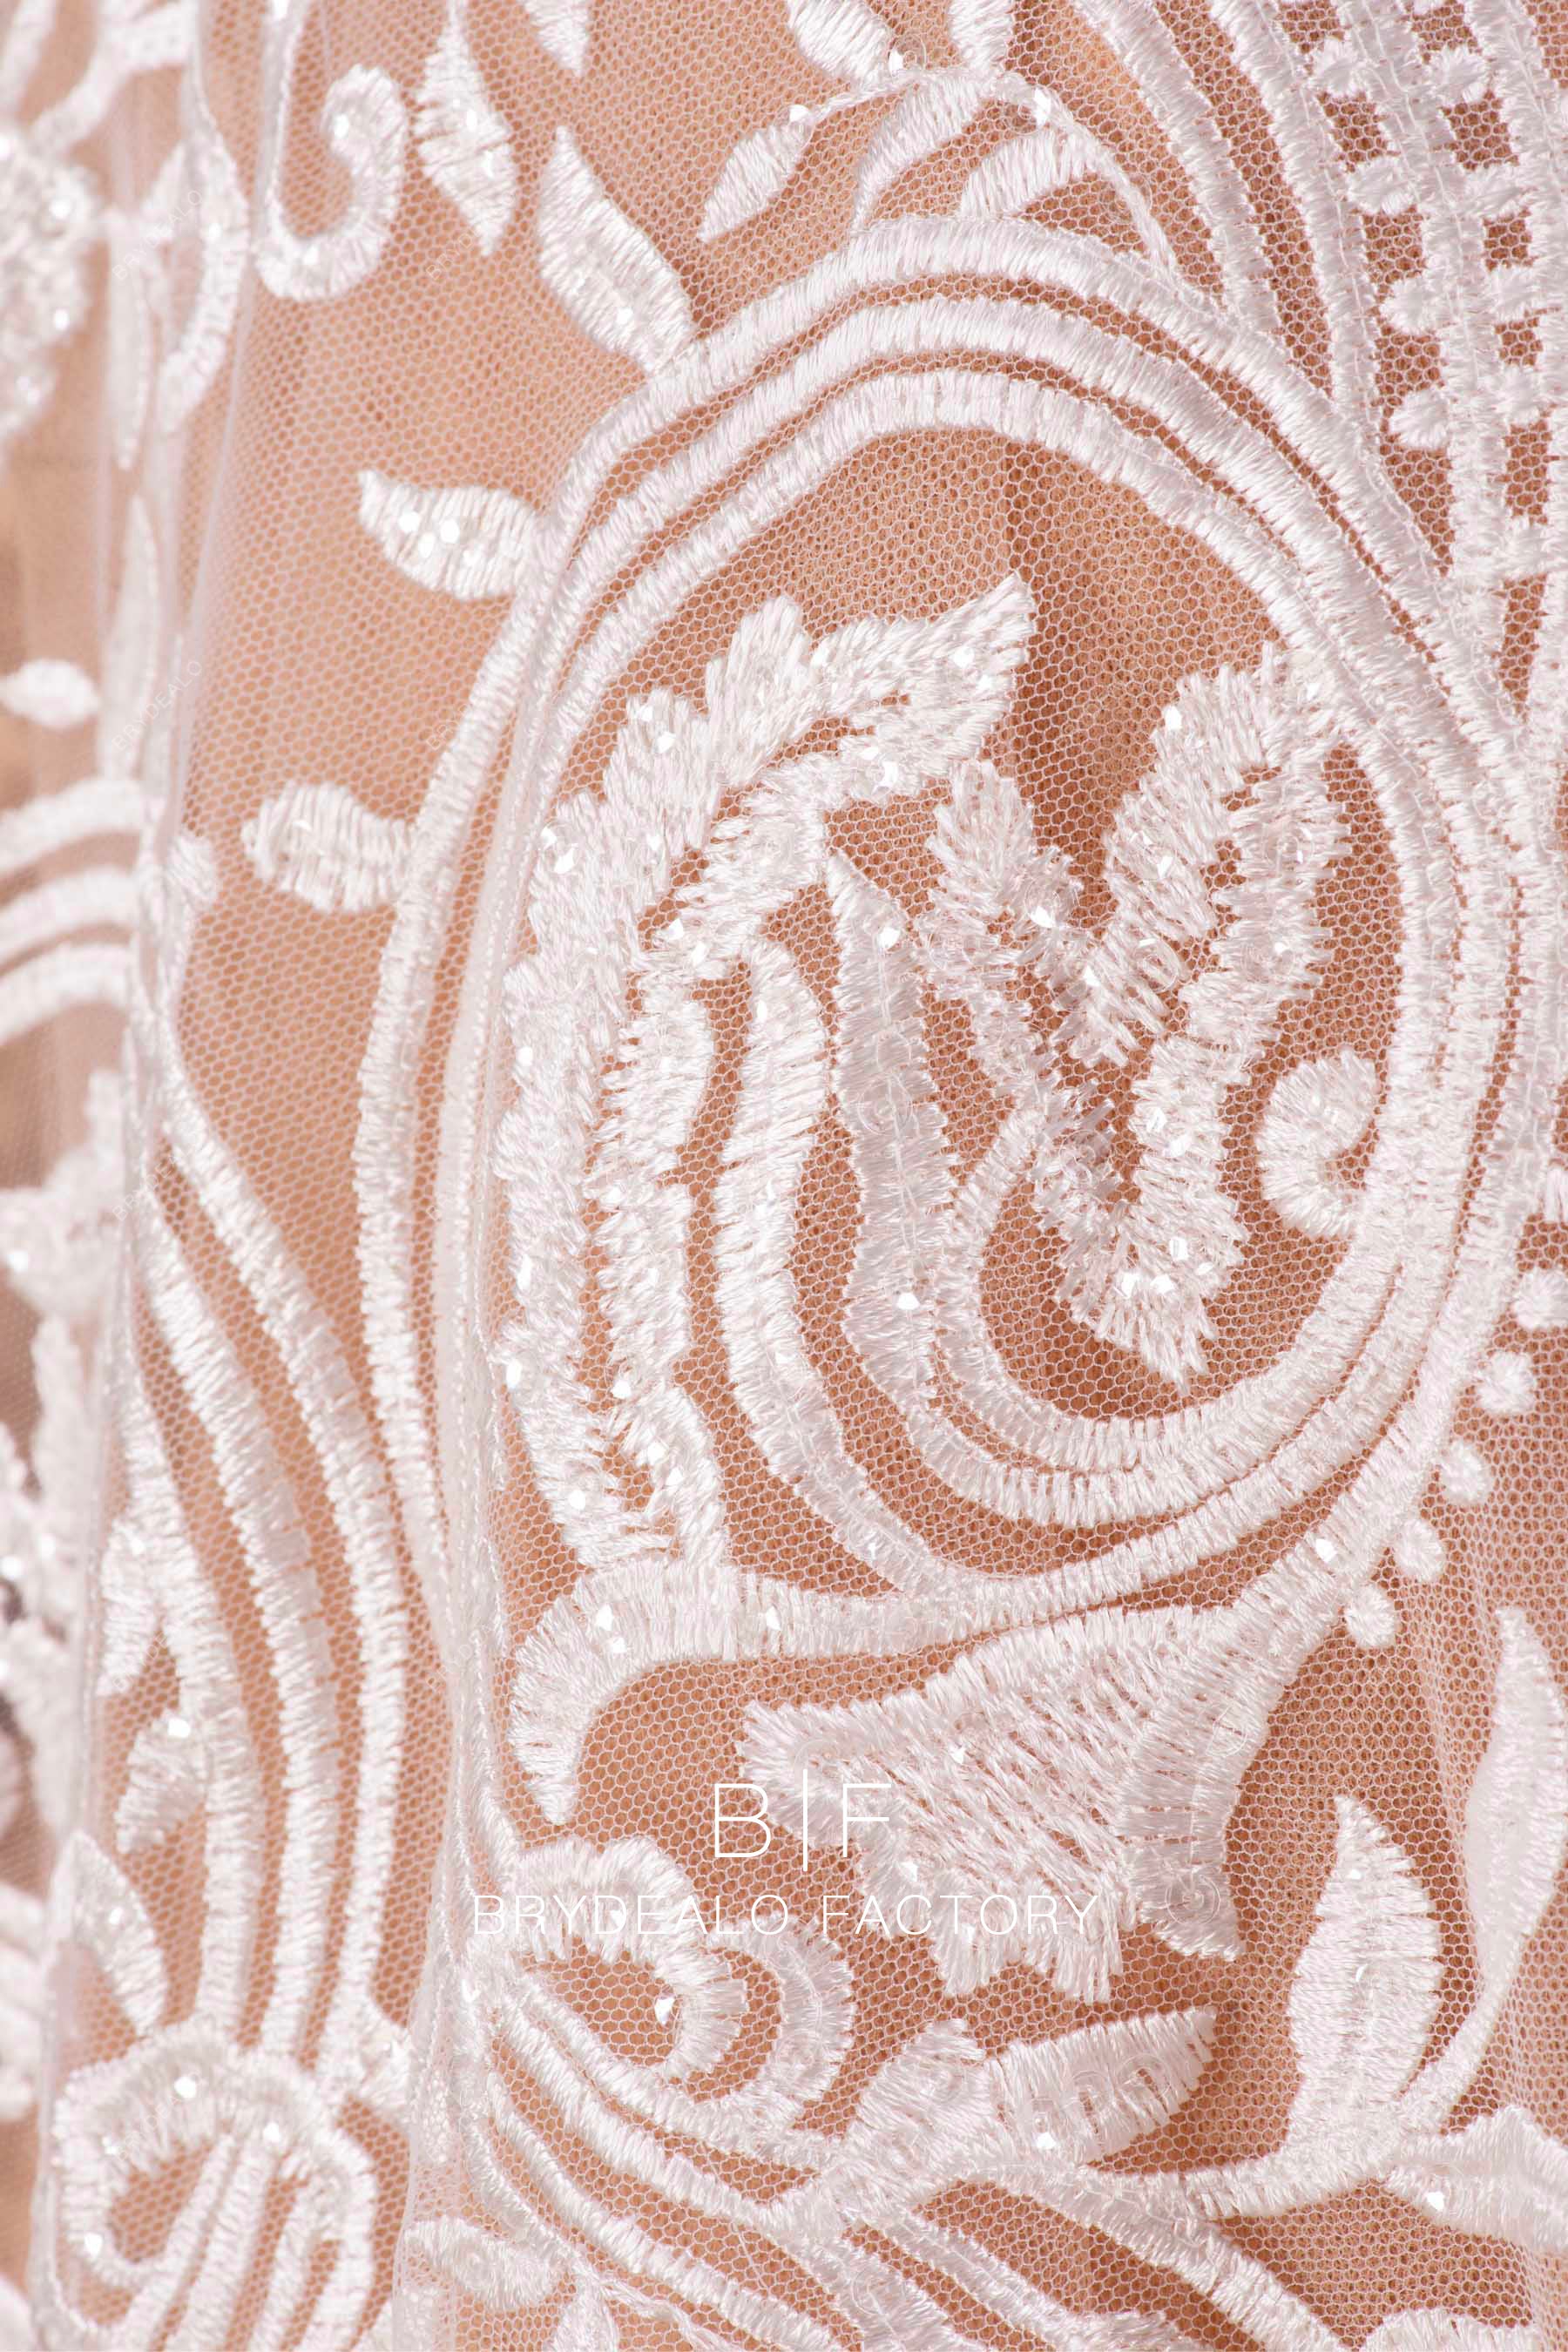 clear sequin lace fabric